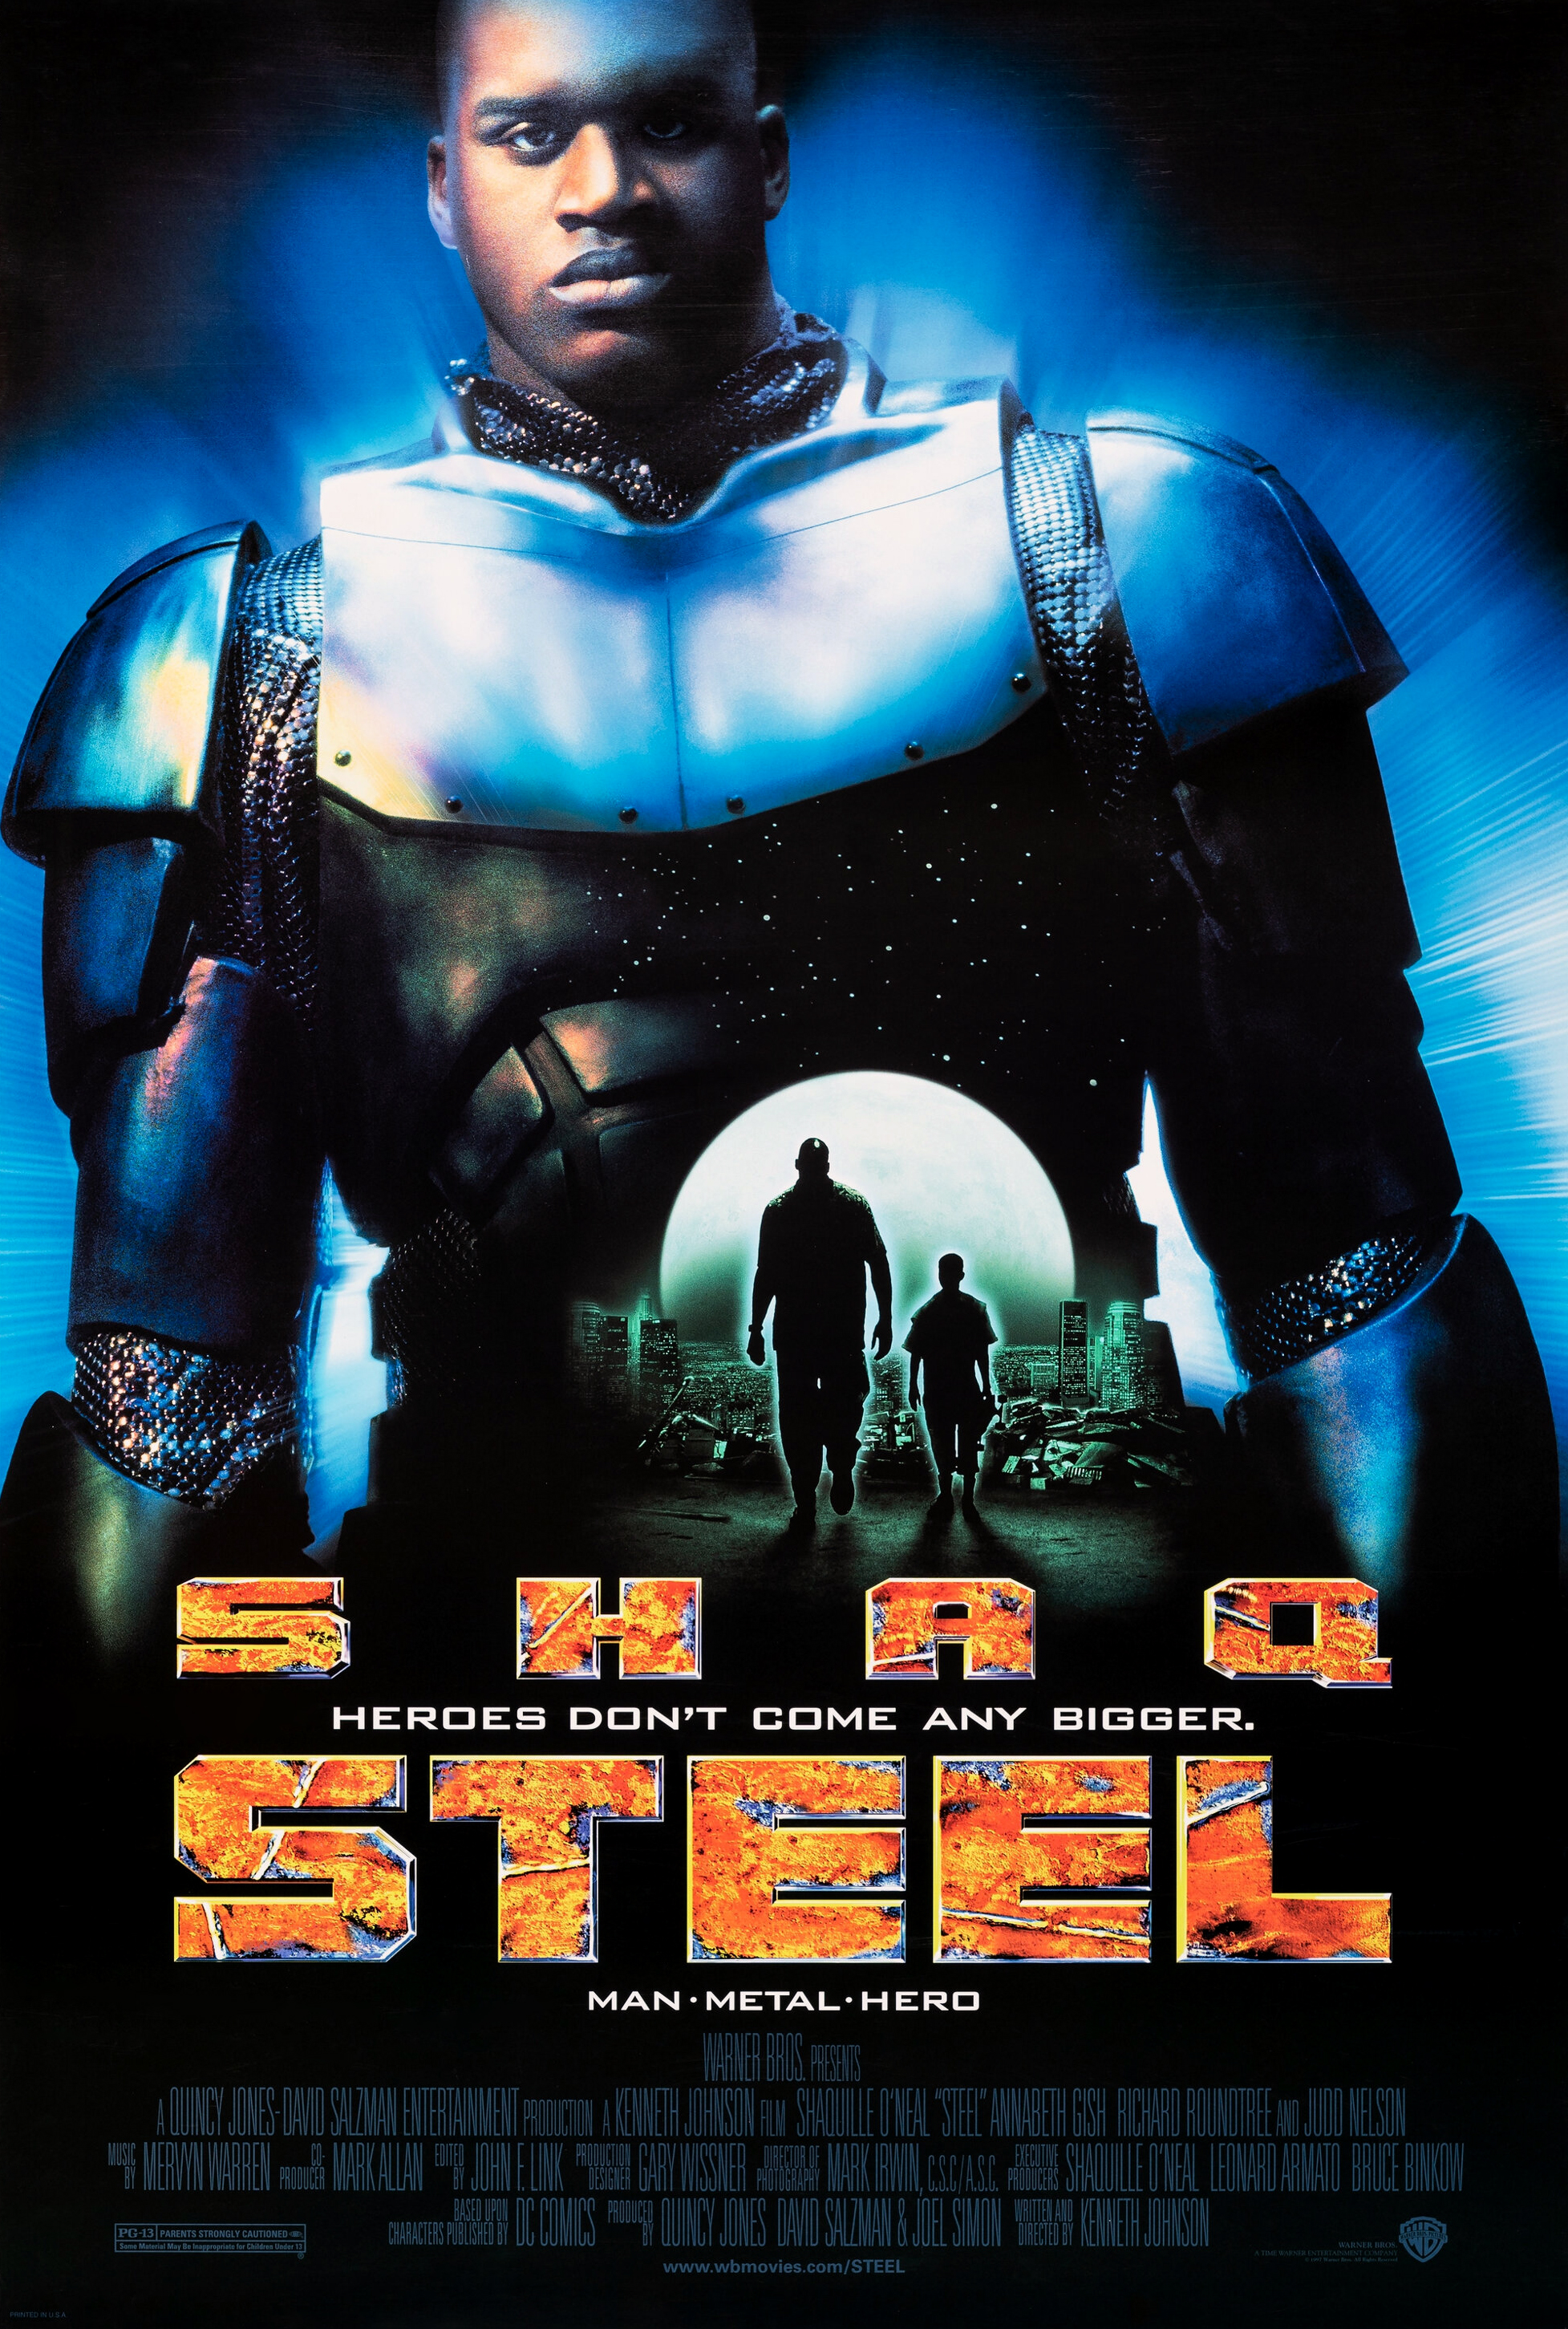 Steel (1997) starring Shaquille O'Neal on DVD on DVD